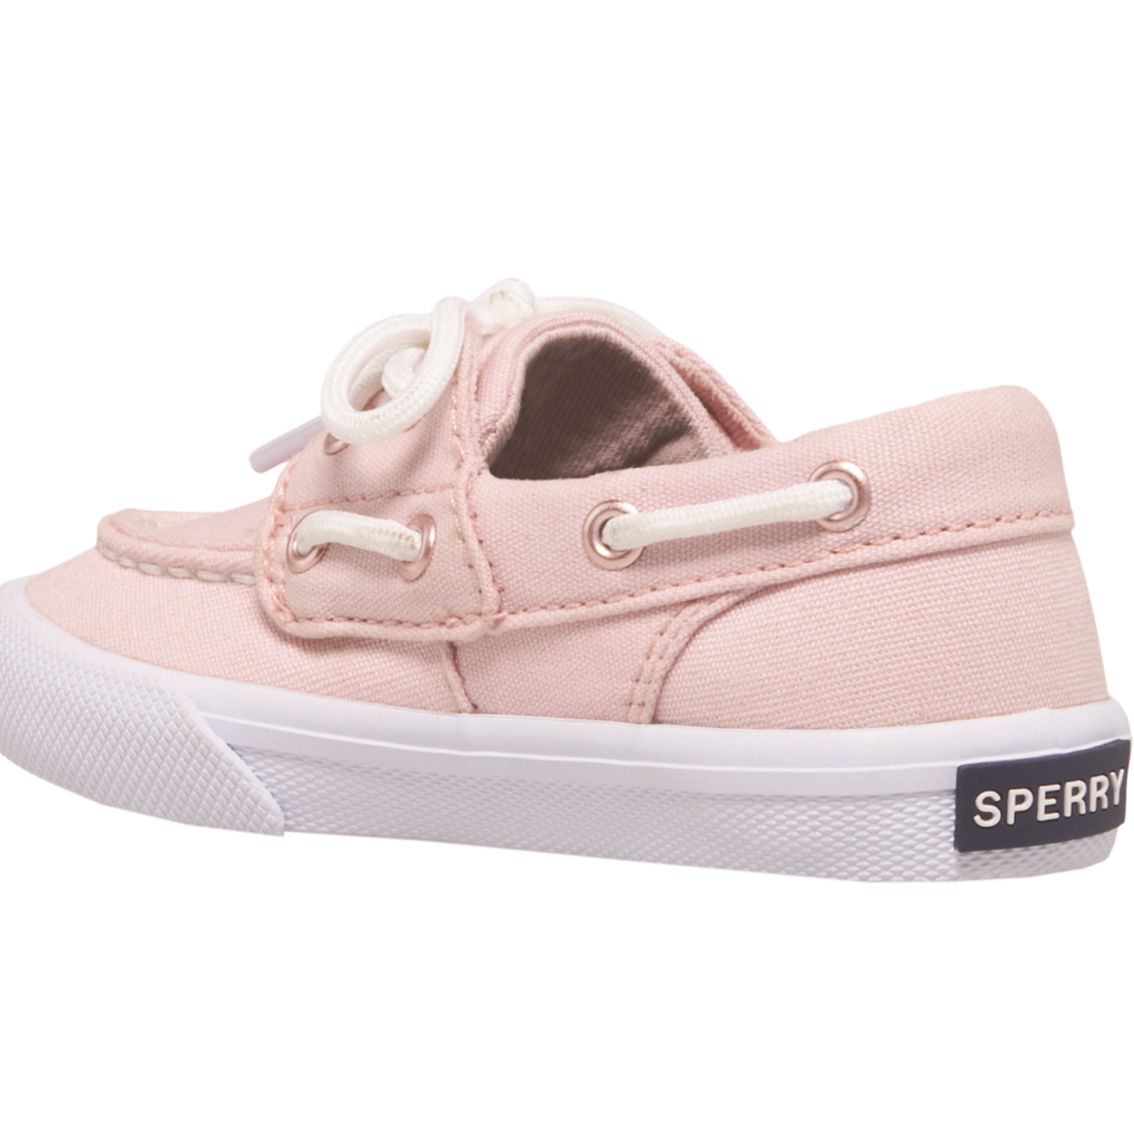 Sperry Toddler Girls Bahama Jr. Sneakers - Image 2 of 5